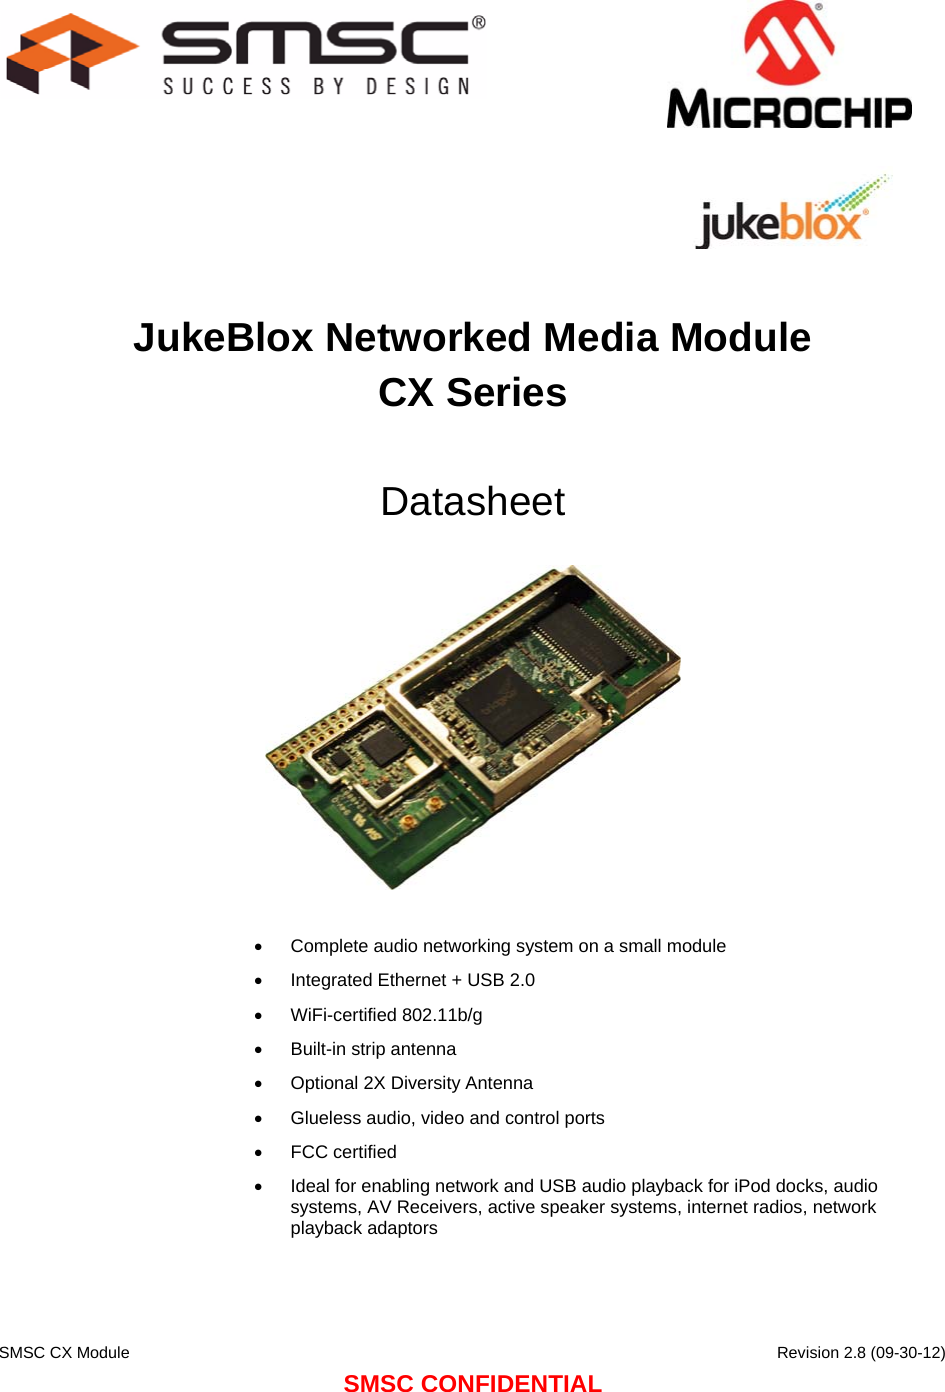     SMSC CX Module      Revision 2.8 (09-30-12) SMSC CONFIDENTIAL                                   JukeBlox Networked Media Module CX Series  Datasheet    •  Complete audio networking system on a small module •  Integrated Ethernet + USB 2.0 •  WiFi-certified 802.11b/g •  Built-in strip antenna •  Optional 2X Diversity Antenna •  Glueless audio, video and control ports •  FCC certified •  Ideal for enabling network and USB audio playback for iPod docks, audio systems, AV Receivers, active speaker systems, internet radios, network playback adaptors  